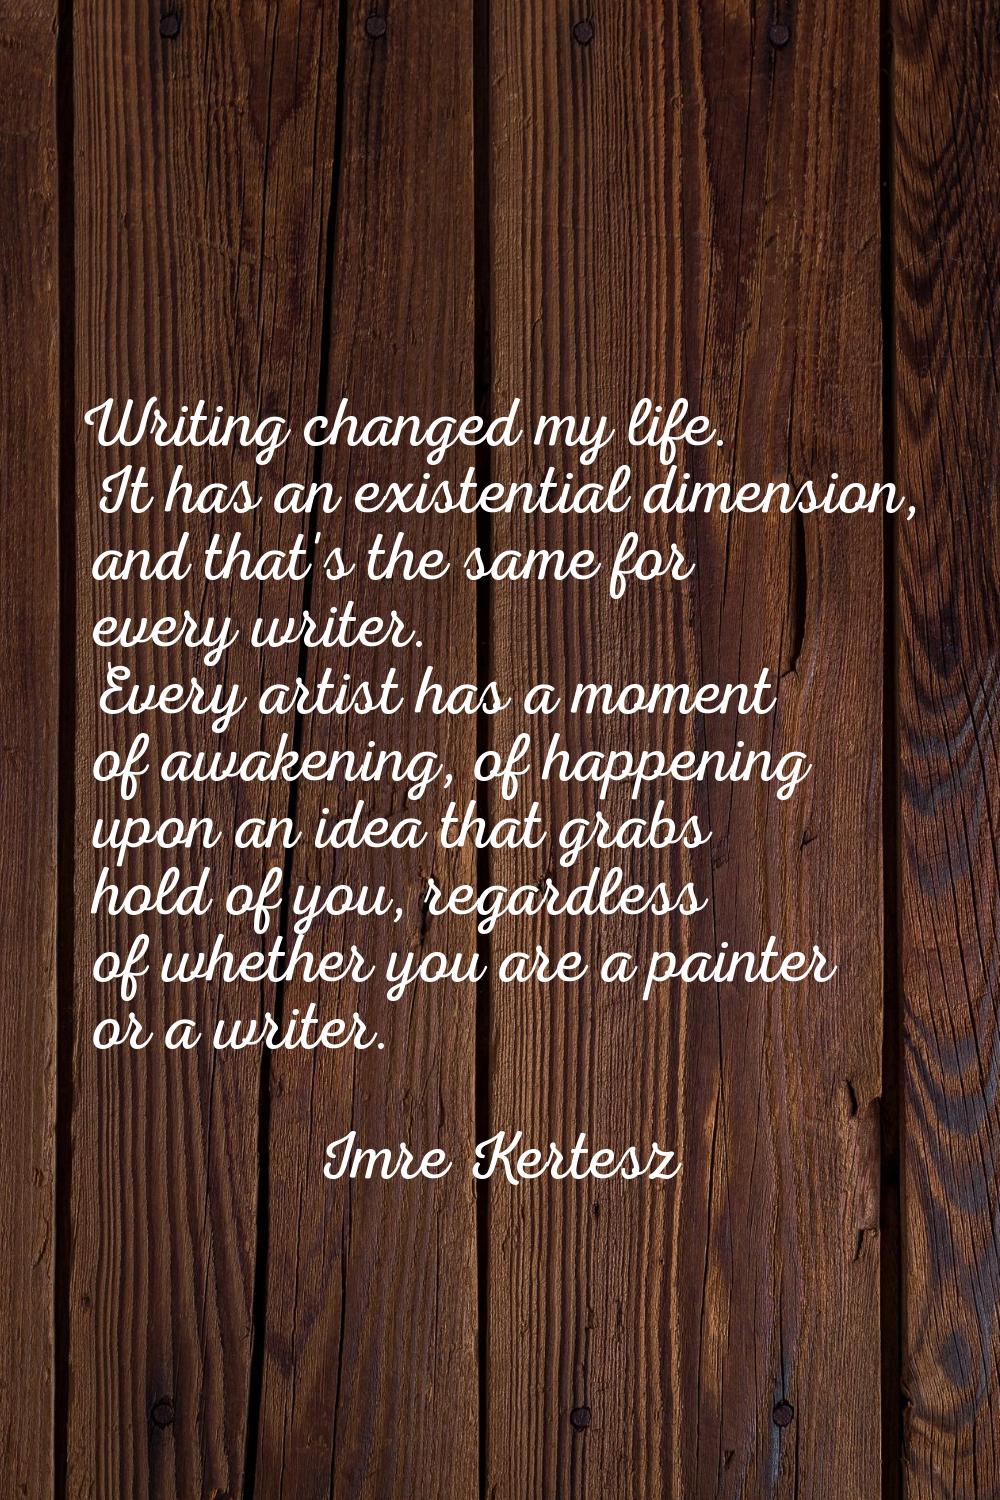 Writing changed my life. It has an existential dimension, and that's the same for every writer. Eve